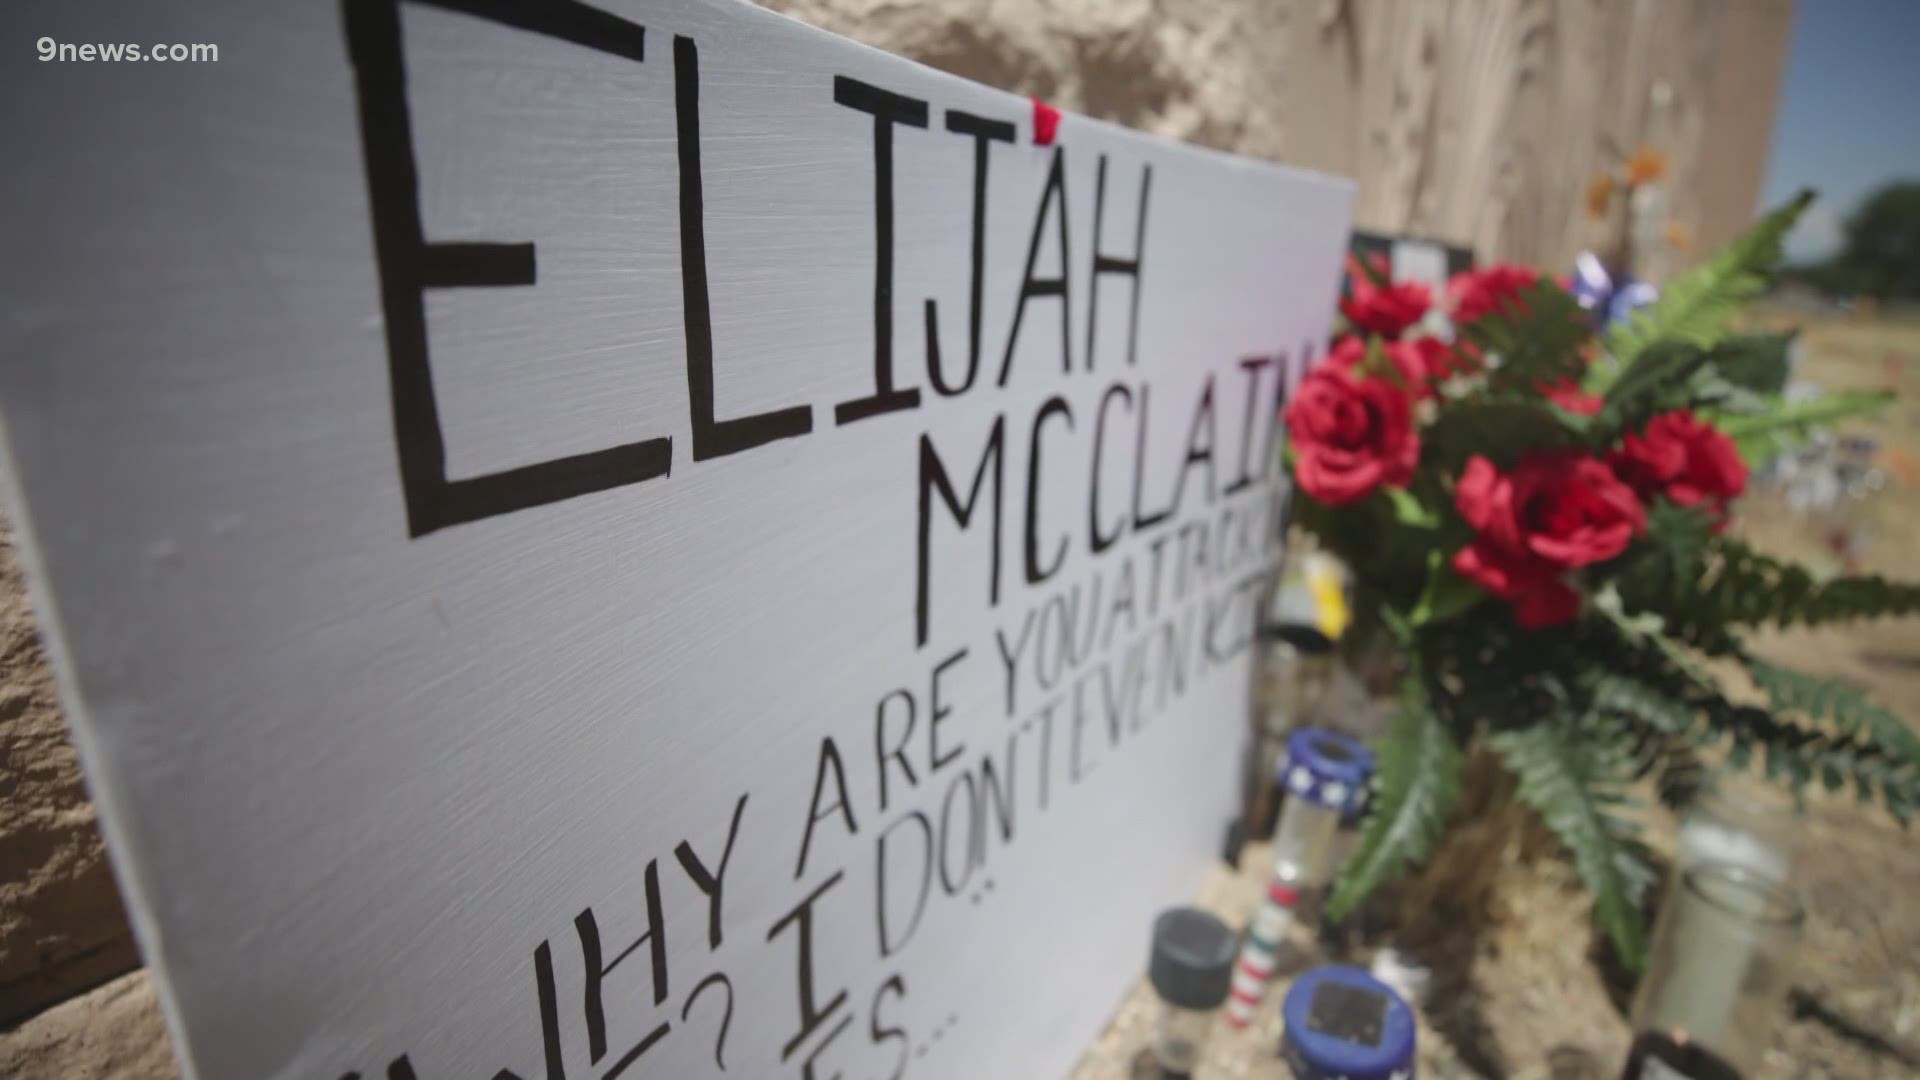 The City of Aurora expects to release the results of an independent investigation into the death of Elijah McClain on Monday.